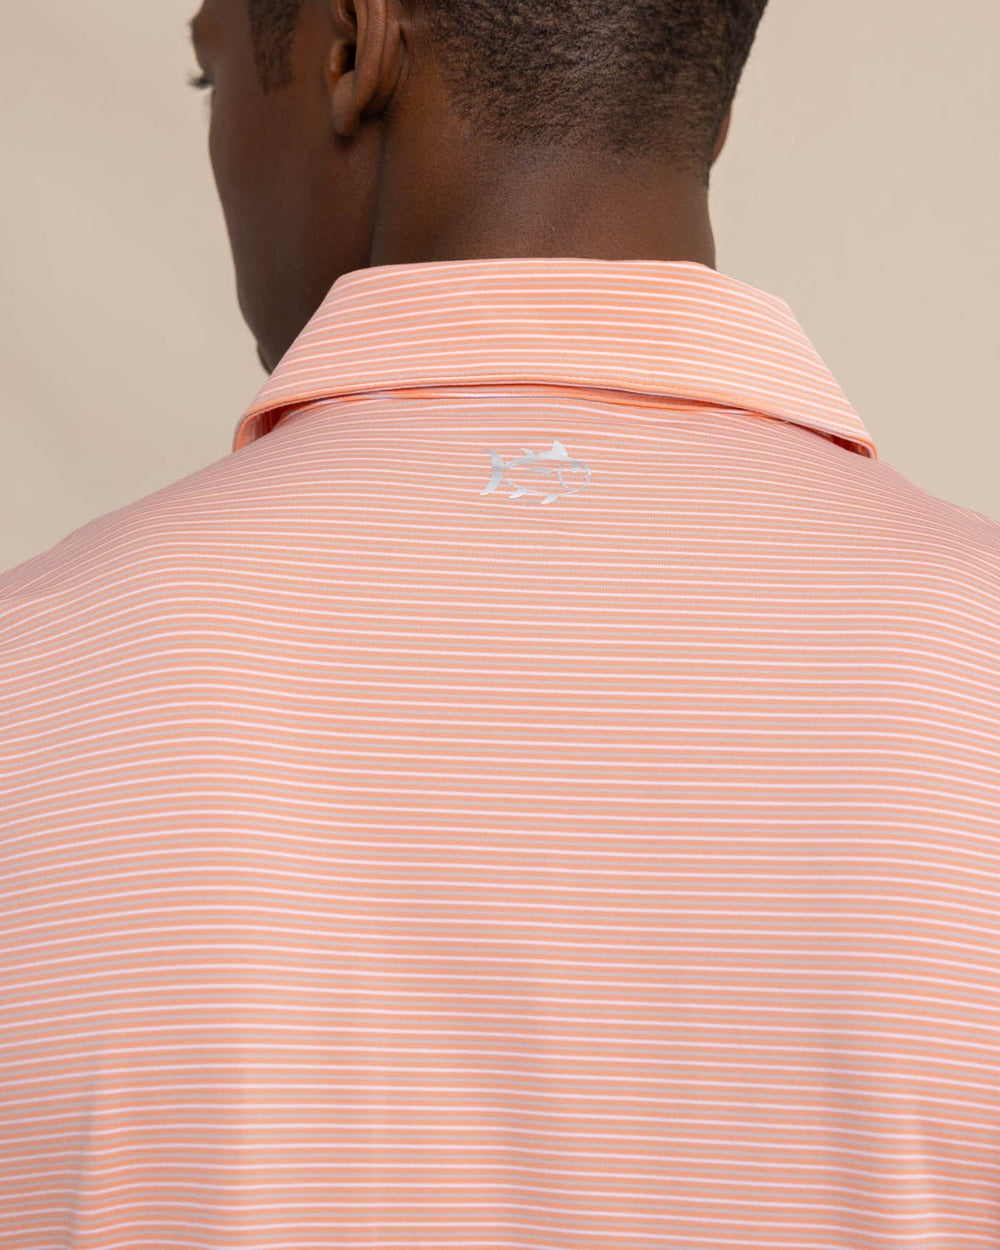 The detail view of the Southern Tide brrr-eeze Baytop Stripe Performance Polo by Southern Tide - Desert Flower Coral